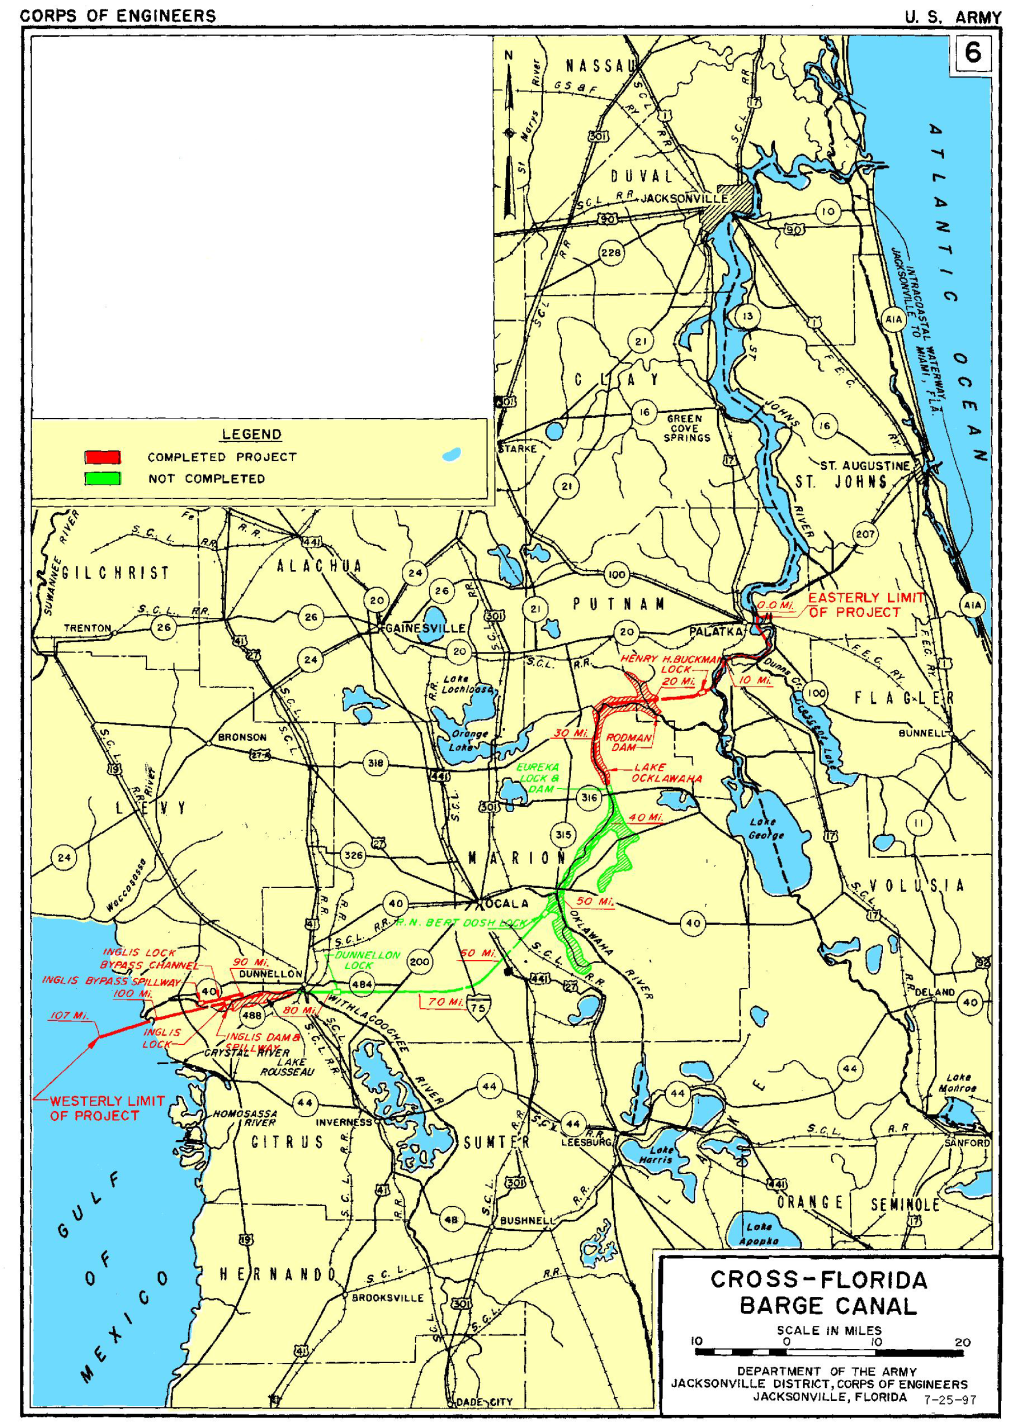 Geohydrology of the Cross-Florida Barge Canal Area with Special Reference to the Ocala Vicinity